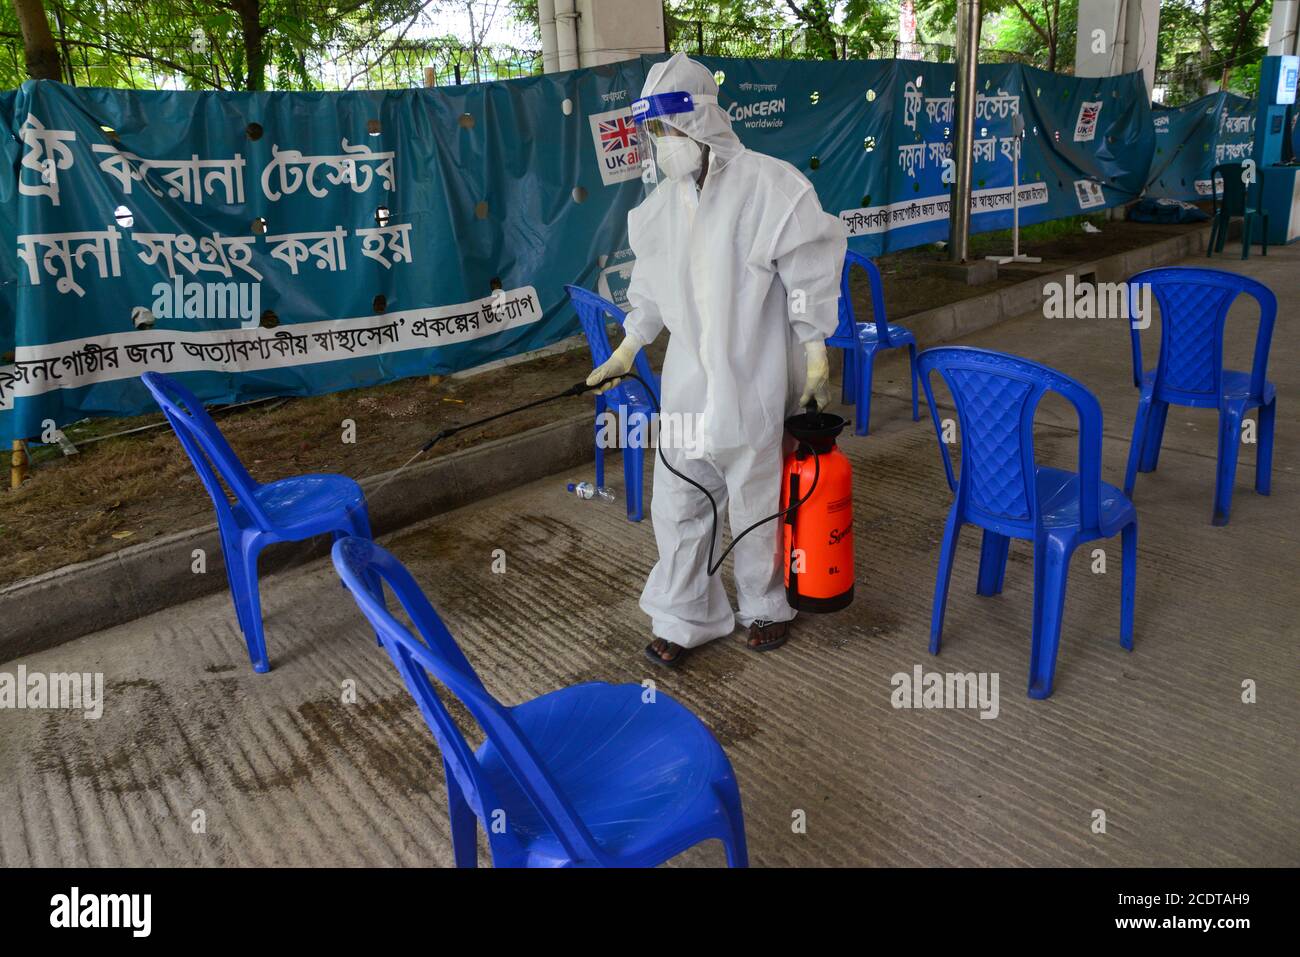 Health worker sprays disinfectant at Mugda Medical College and Hospital, amid the coronavirus pandemic in Dhaka, Bangladesh, on August 29, 2020 Stock Photo